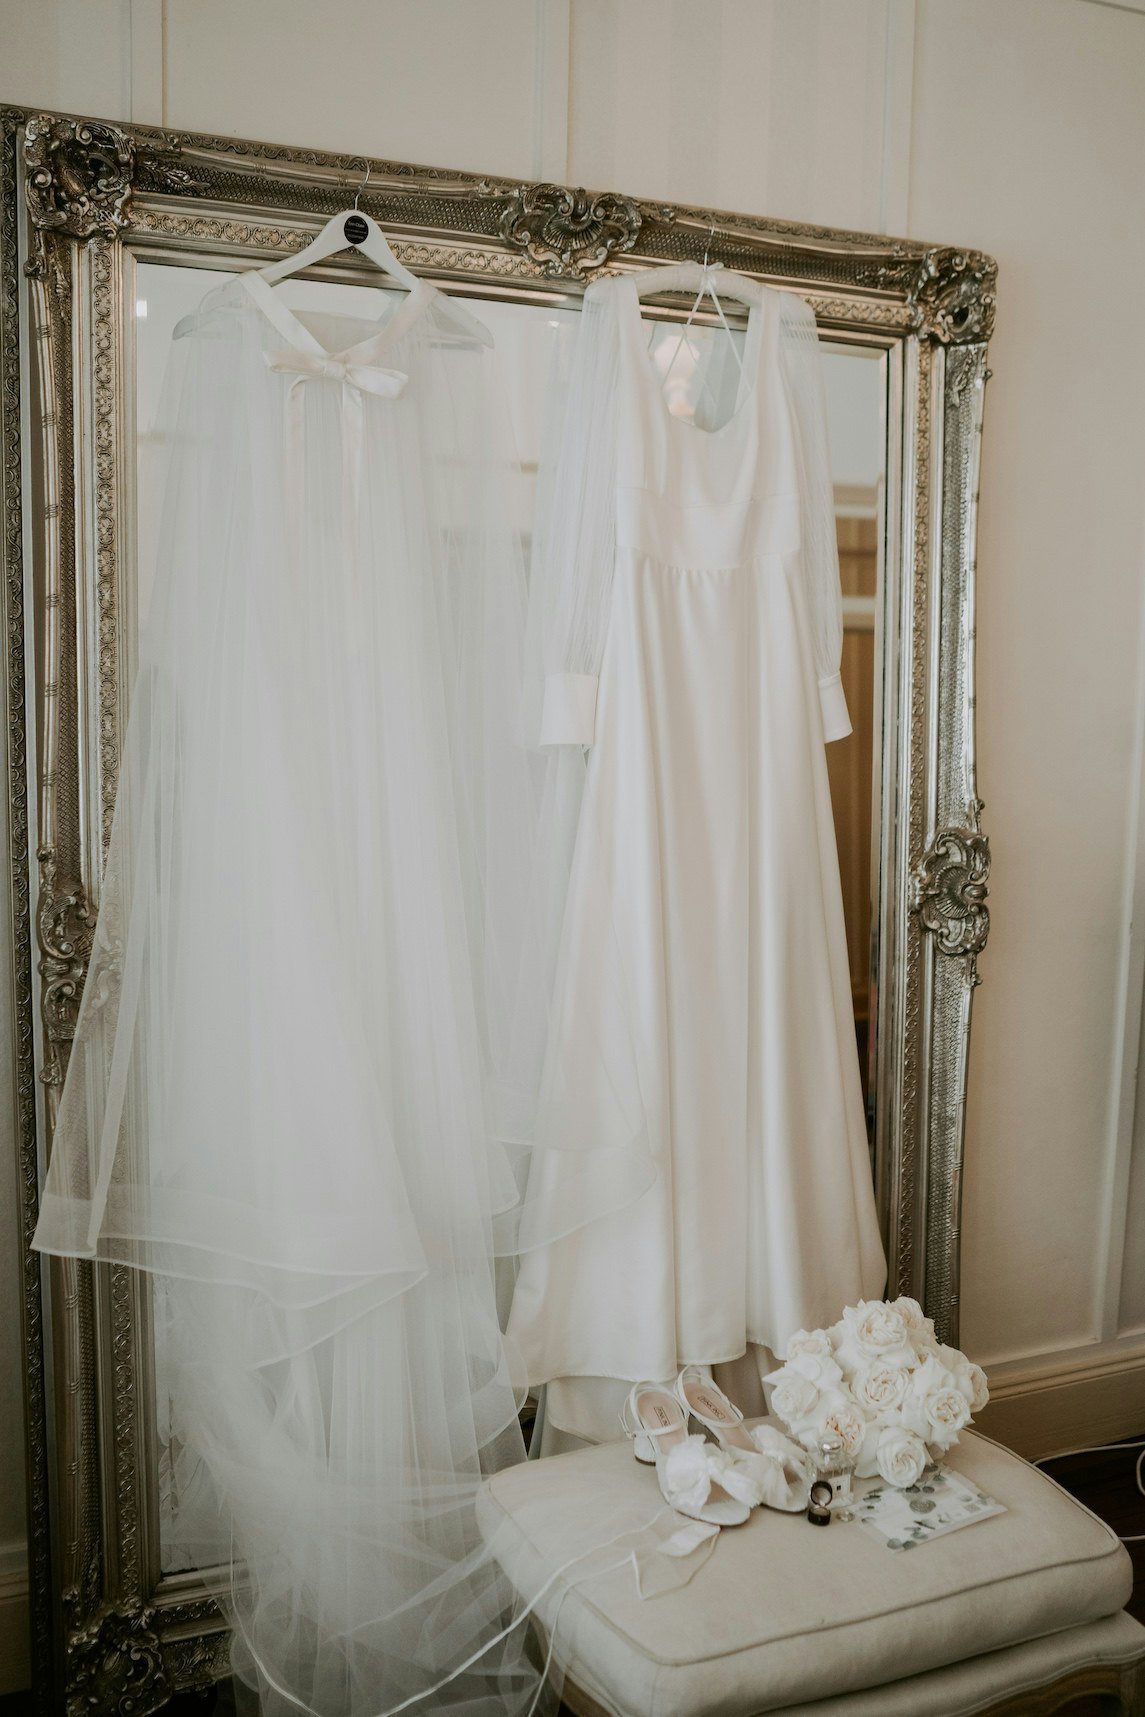 Wedding dress, shoes and veil hanging on mirror